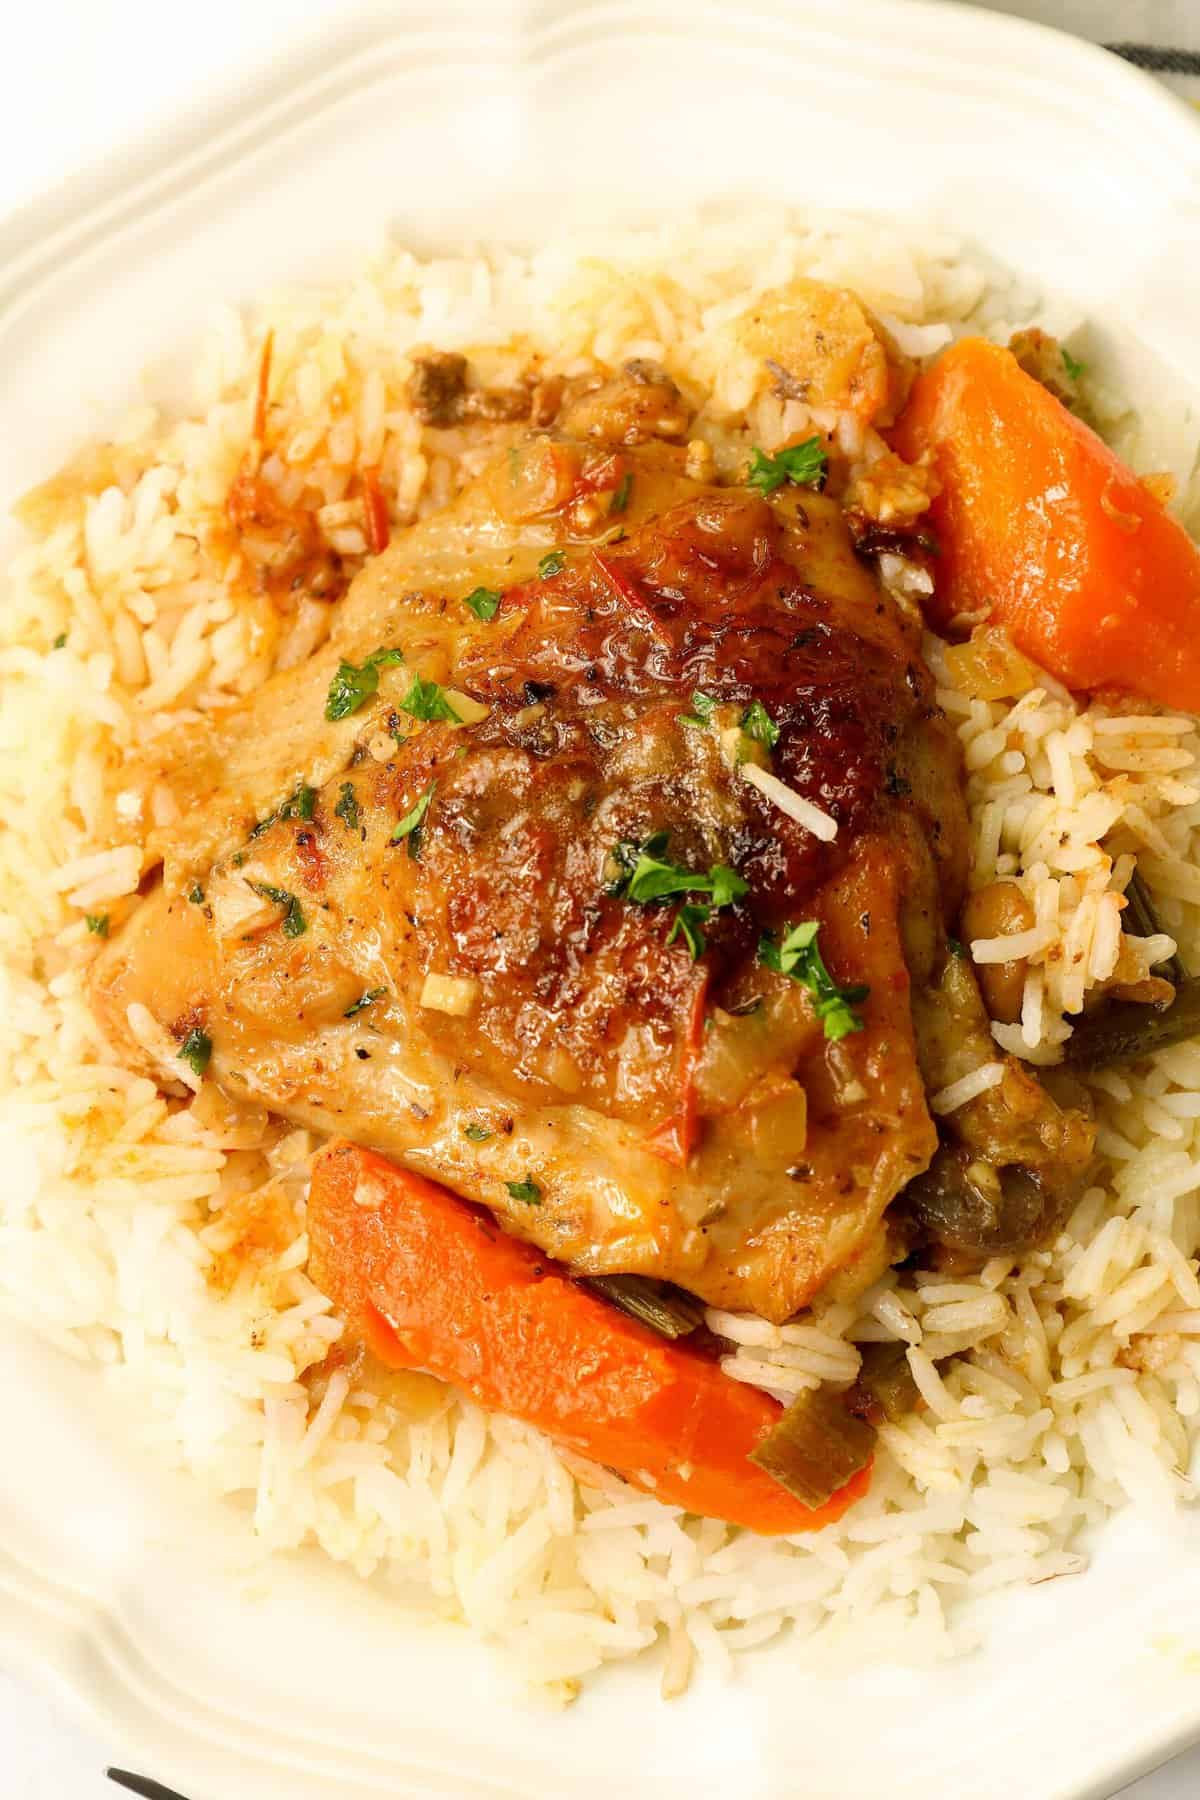 Serving Braised Chicken Thighs with rice and vegetables